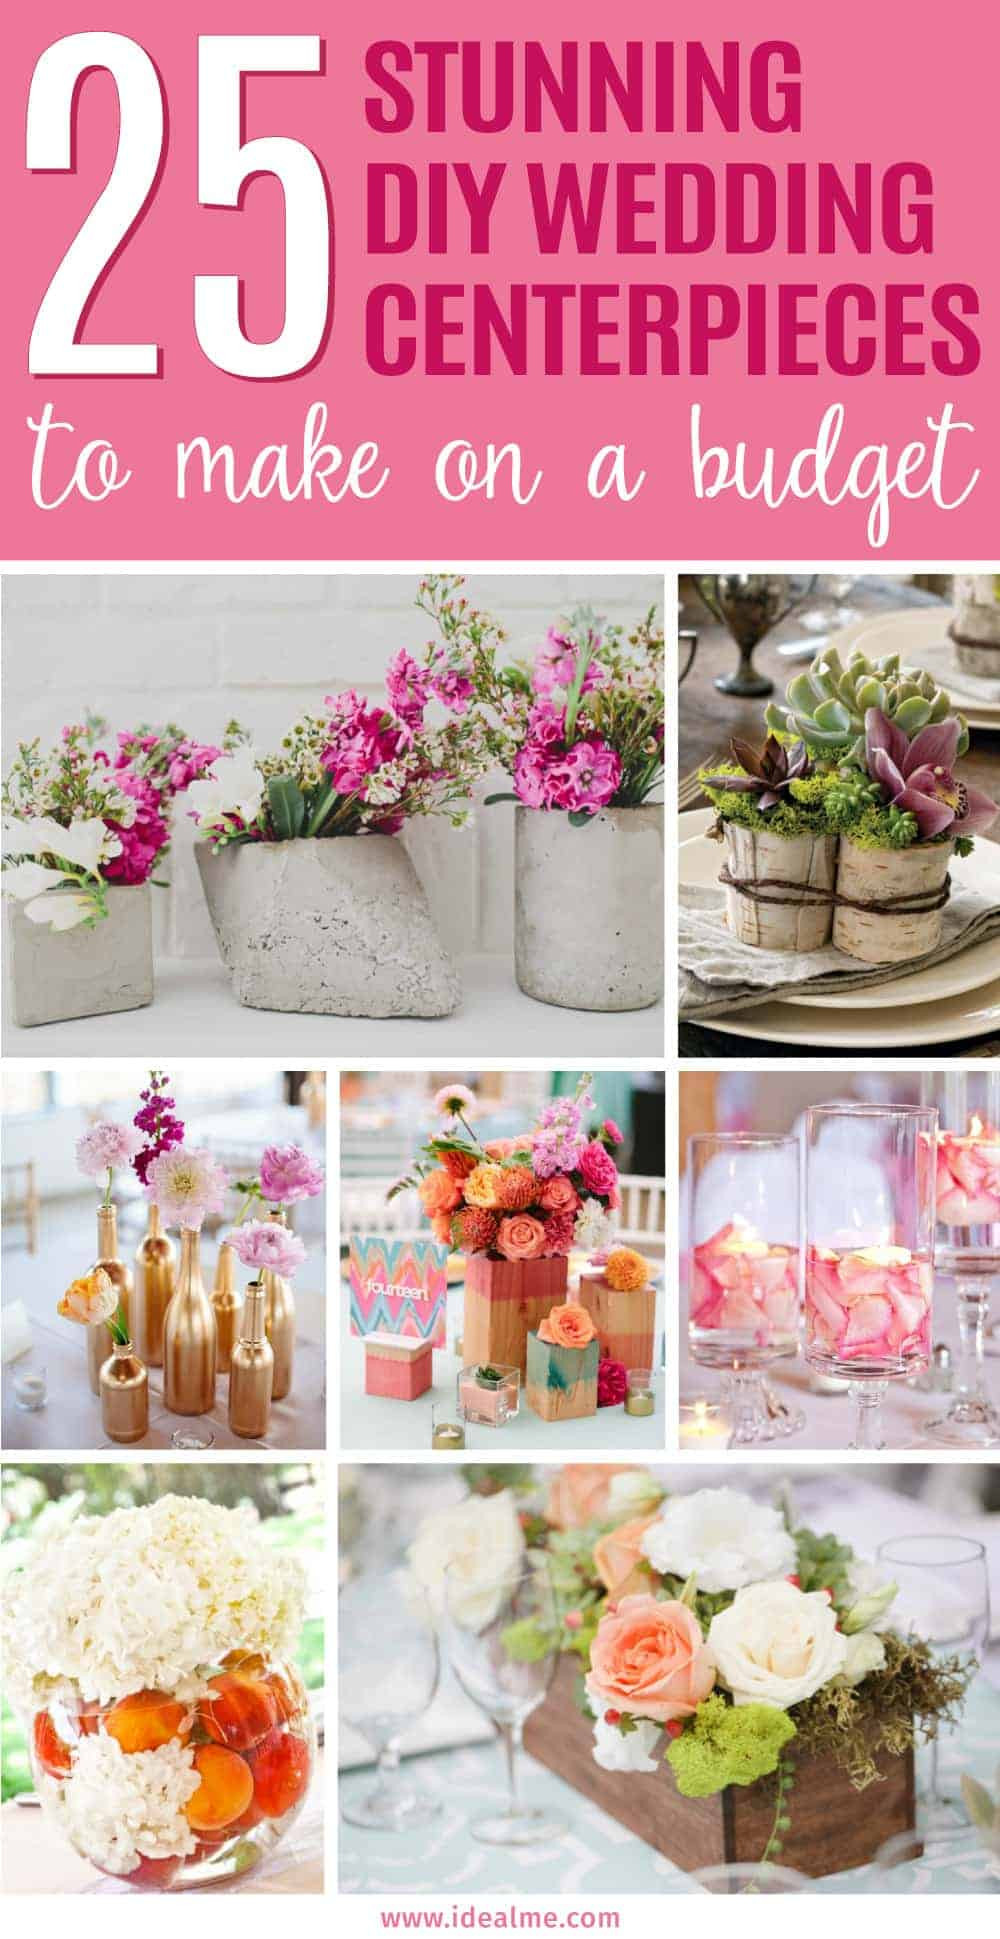 Best ideas about DIY Centerpiece Ideas
. Save or Pin 25 Stunning DIY Wedding Centerpieces to Make on a Bud Now.